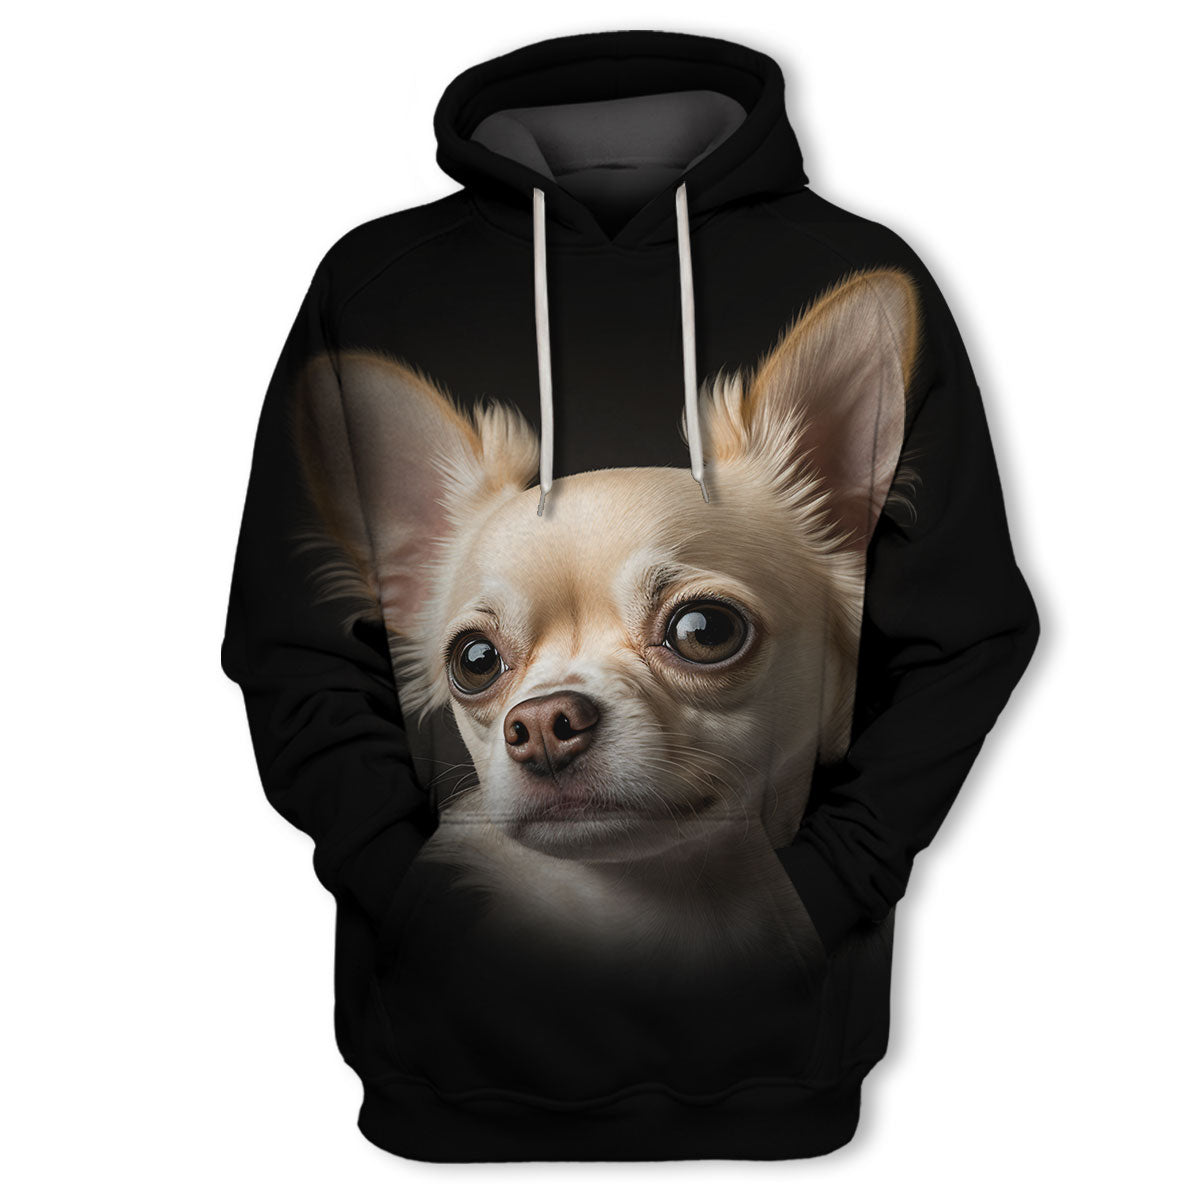 Chihuahua 1 - Unisex 3D Graphic Hoodie